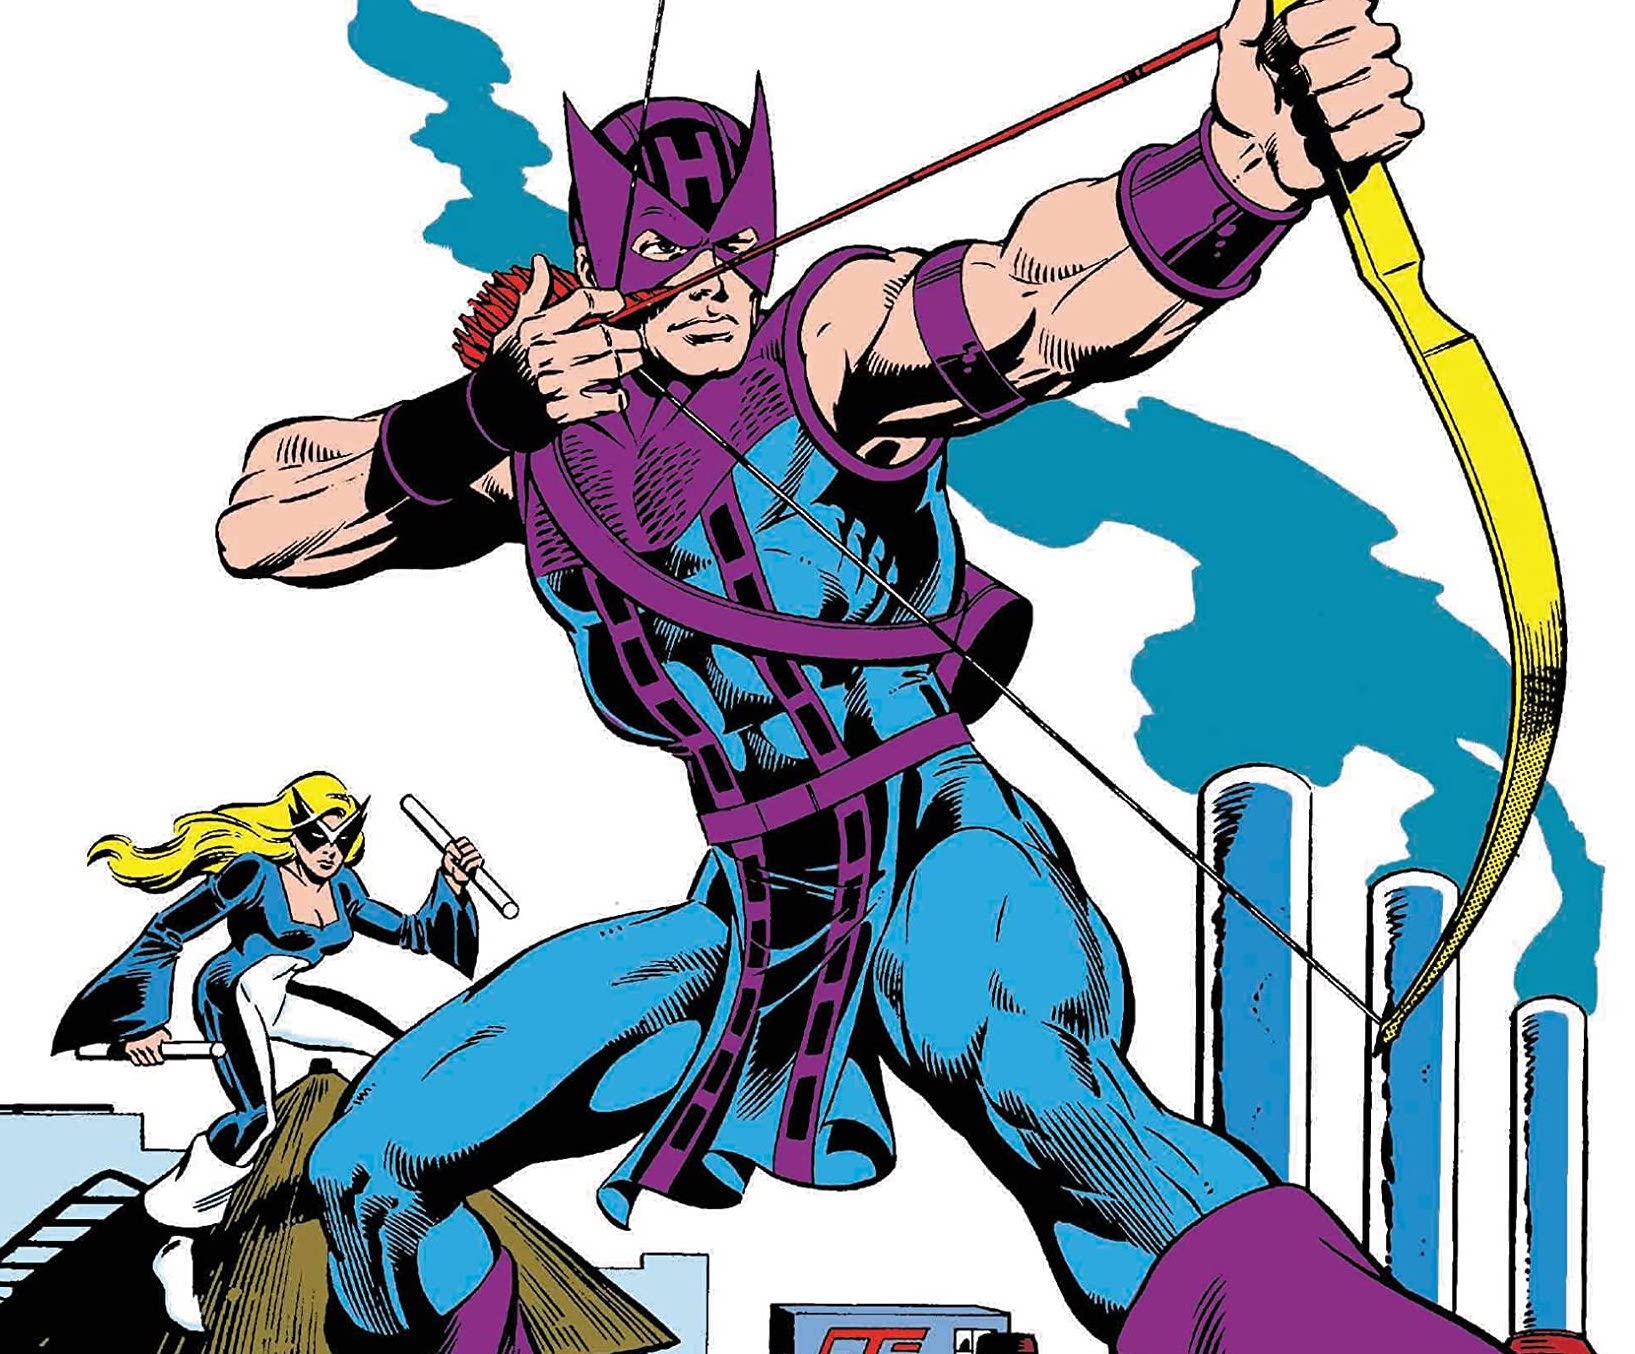 Hawkeye Epic Collection: The Avenging Archer